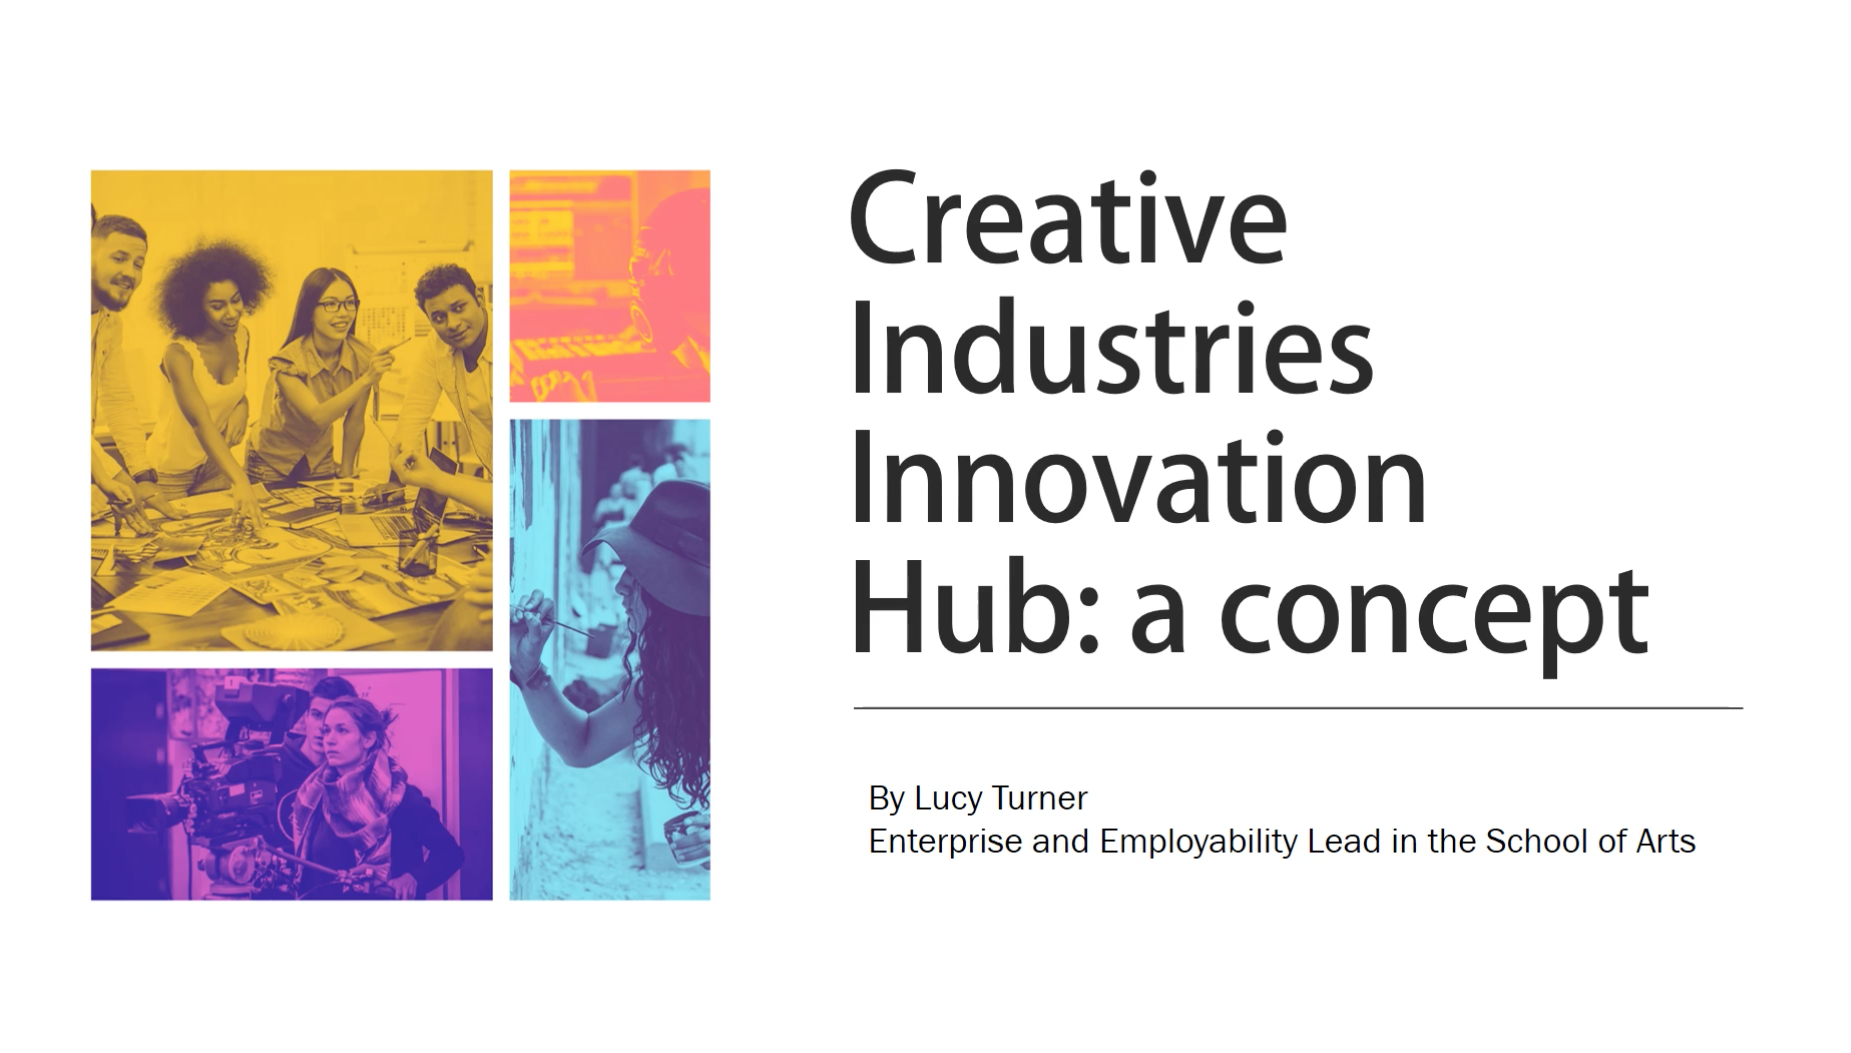 First slide from Creative industries innovation hub